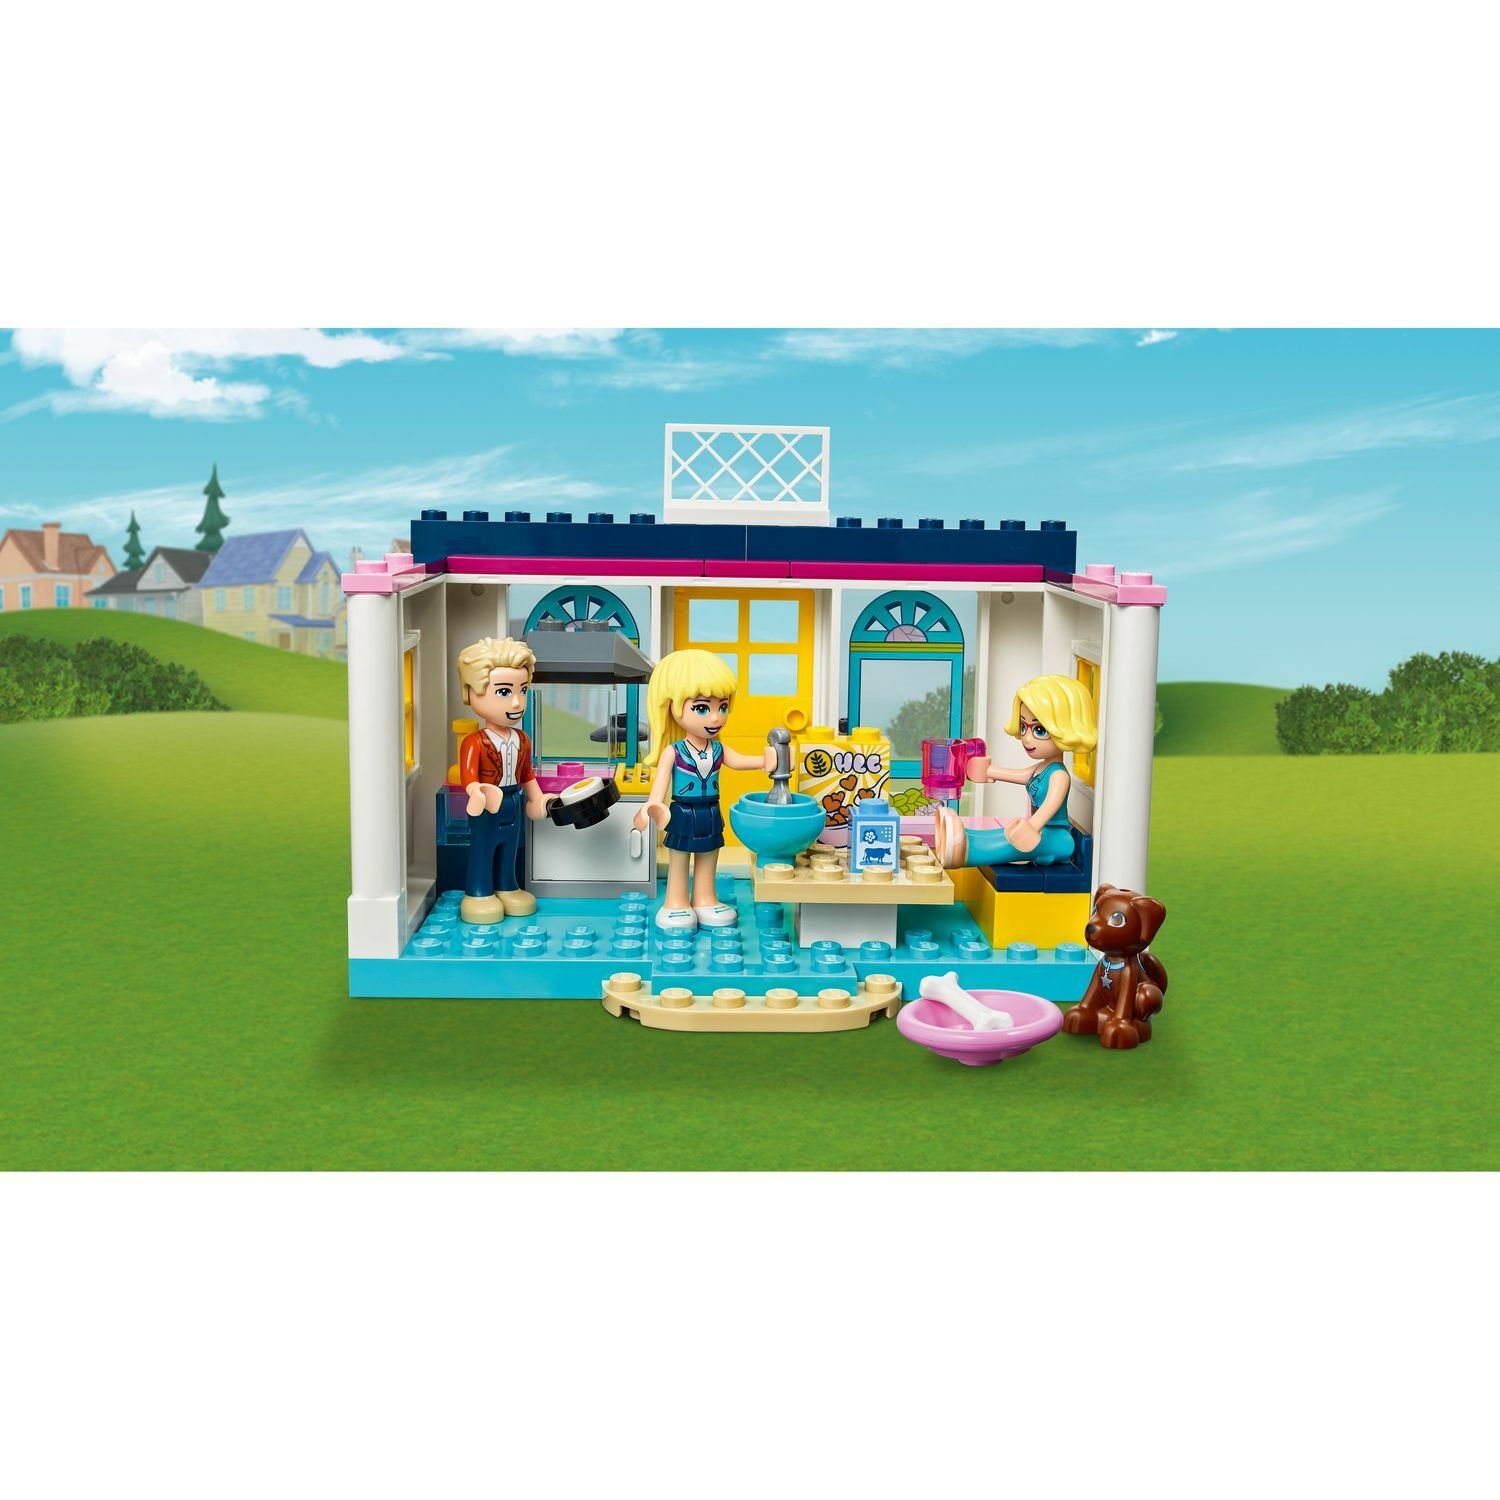 Lego Friends 41398 Дом Стефани